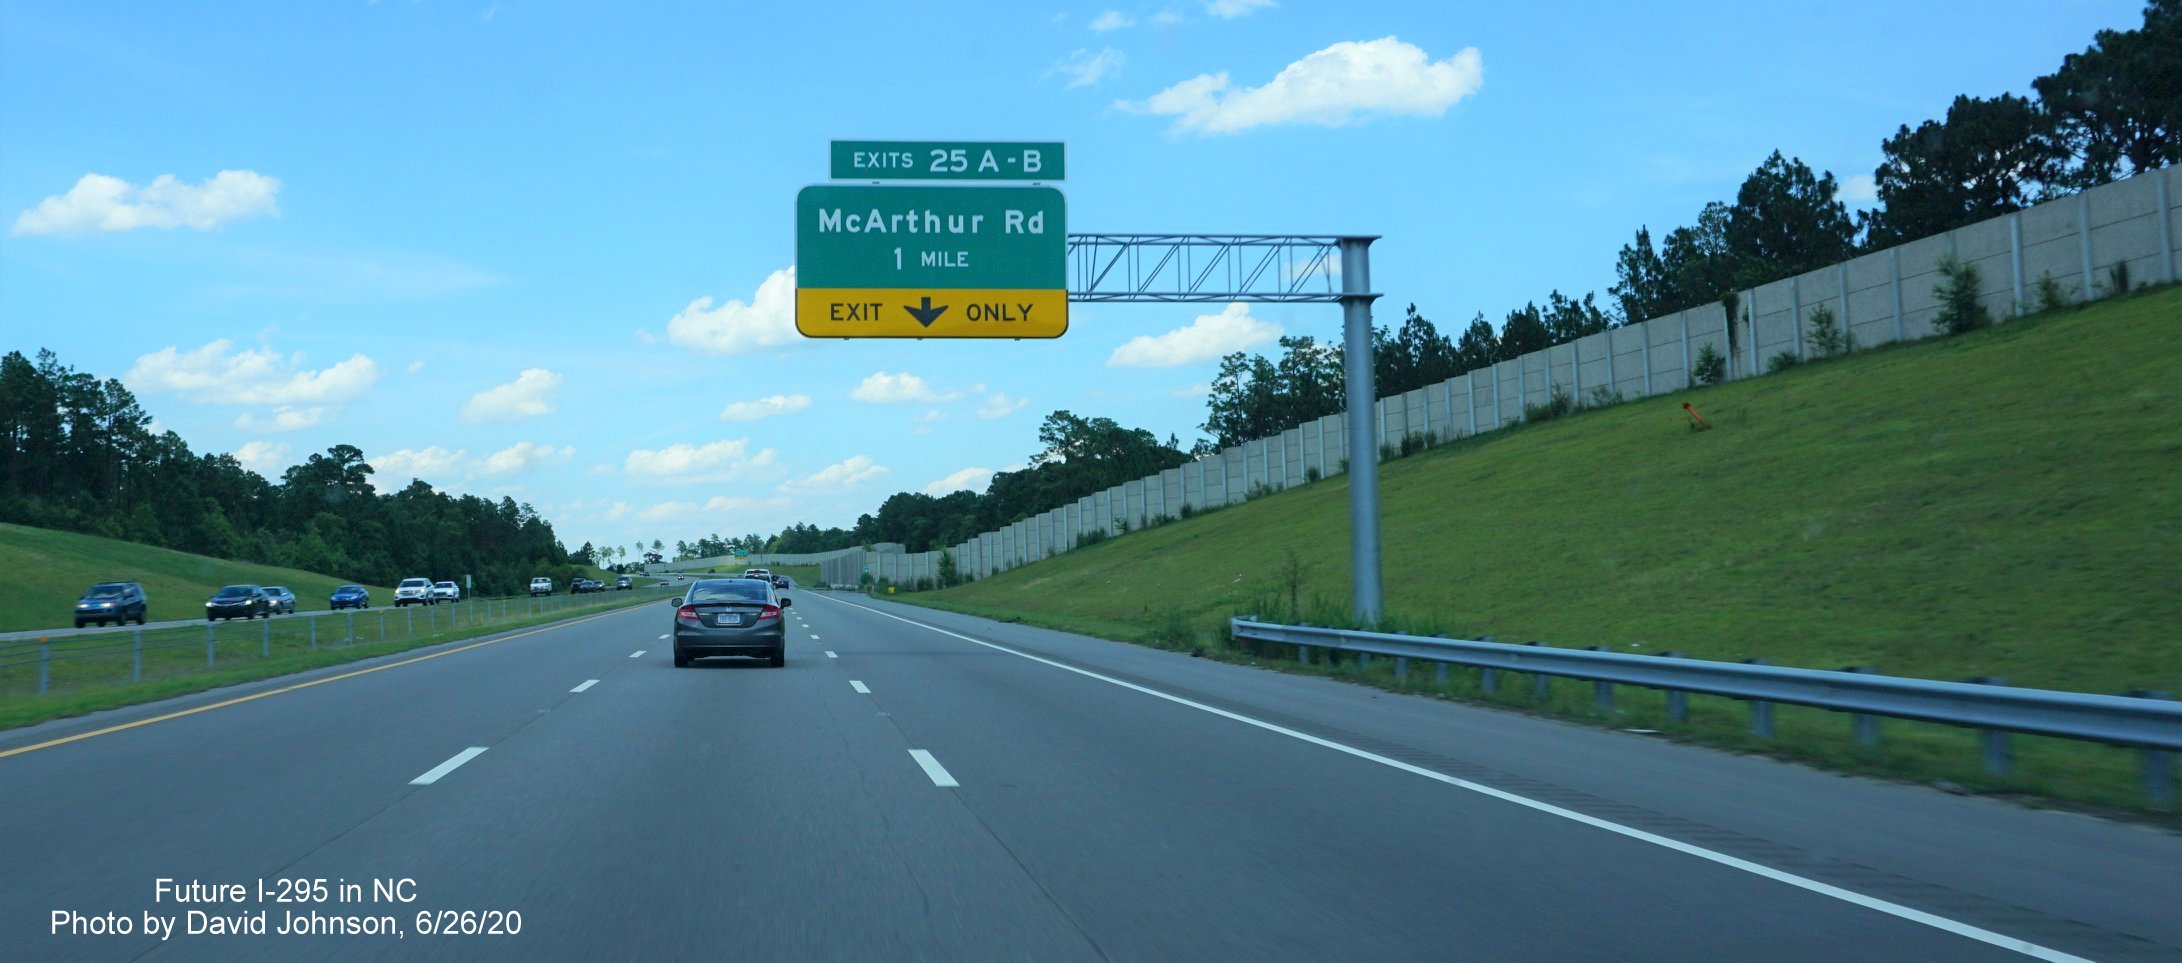 Image of the overhead 1-Mile advance sign for the McArthur Road exit on I-295 North, by David Johnson June 2020